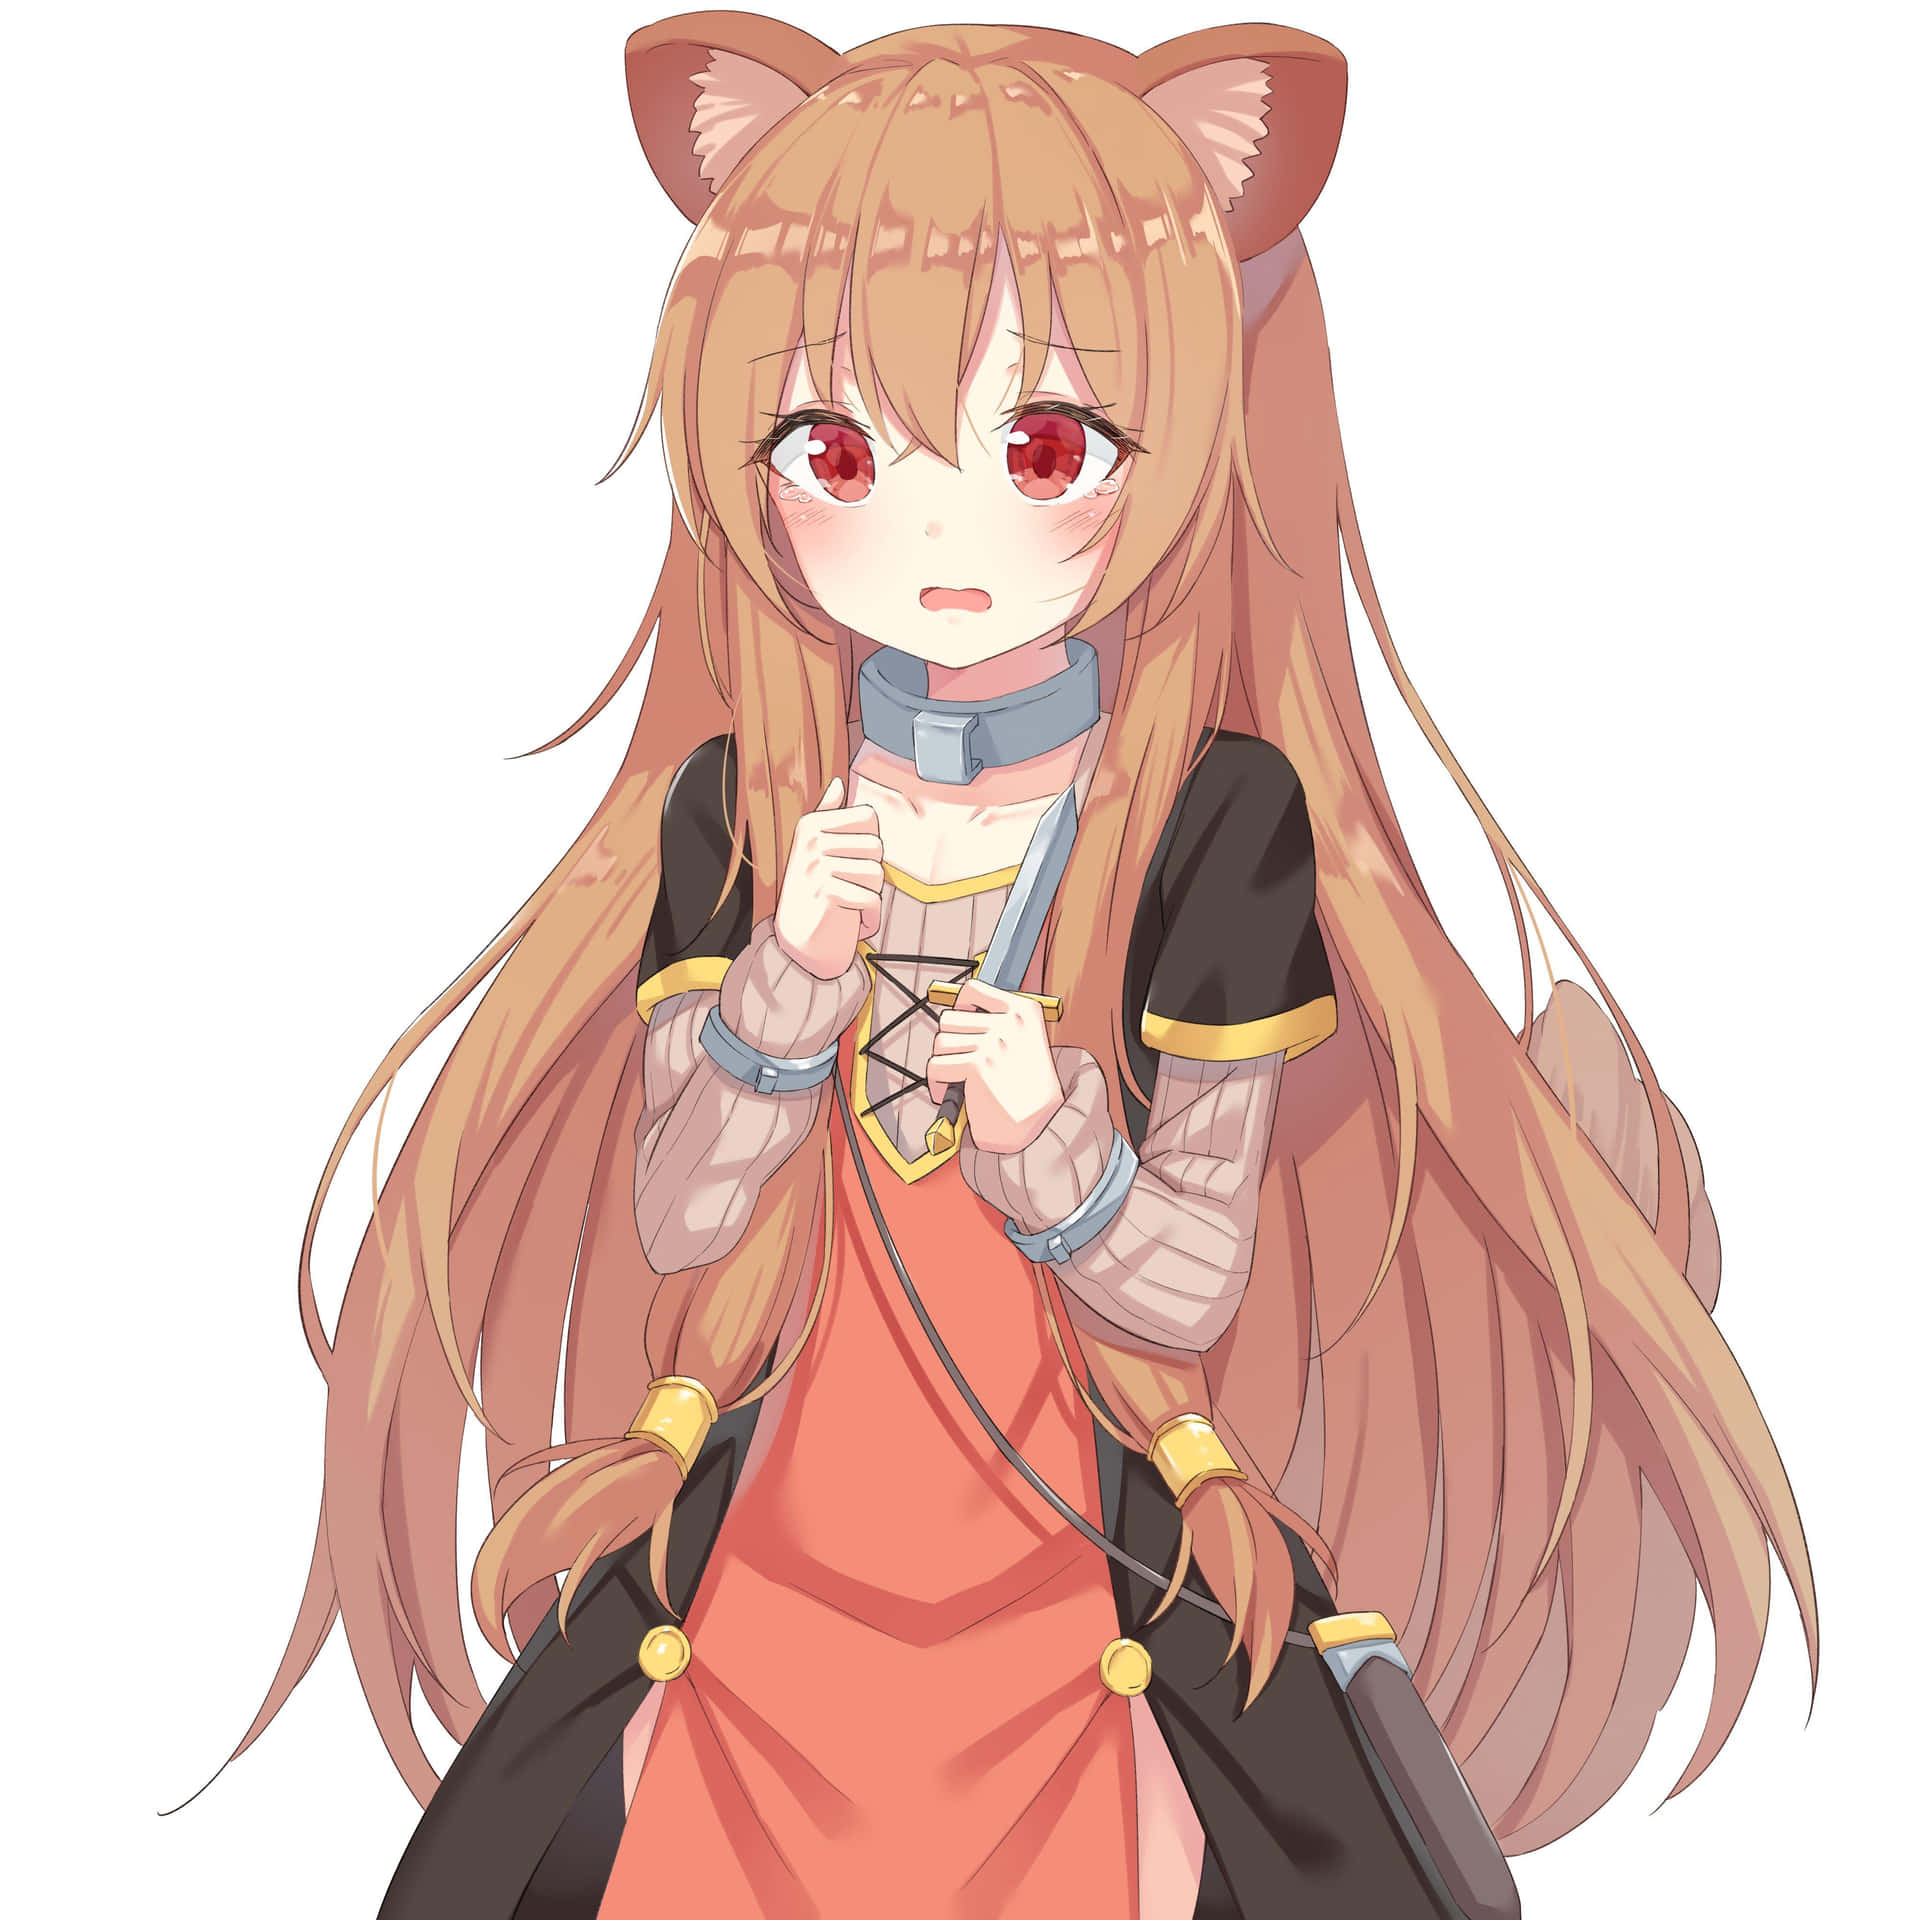 An illustration of Raphtalia from the anime series "The Rising Shield Hero"!